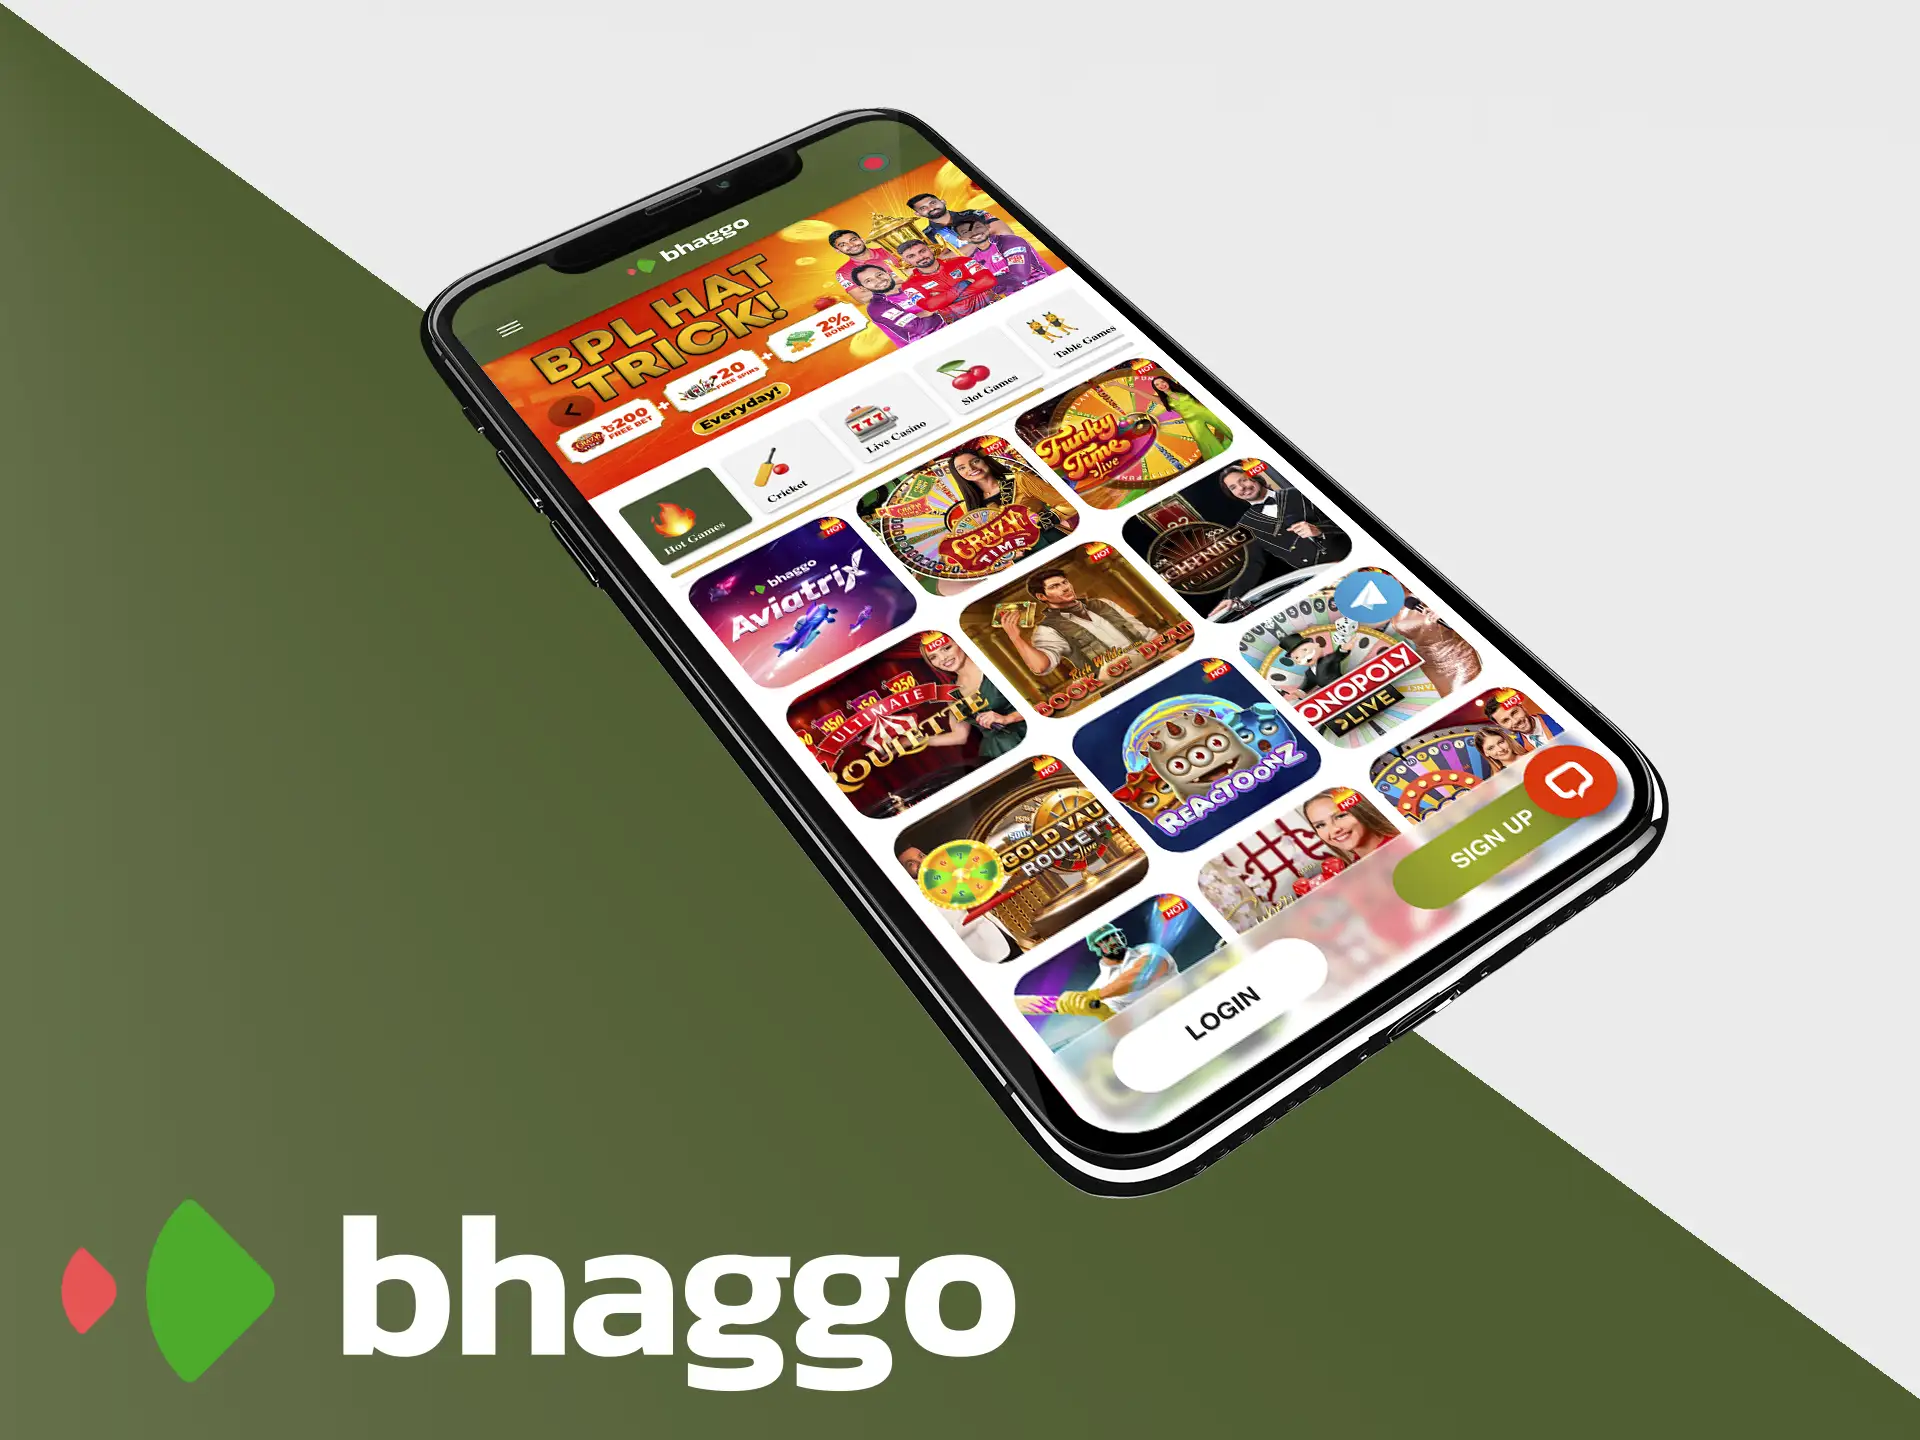 The popular bookmaker in Bangladesh offers its users casino games and betting on the Bhaggo platform.